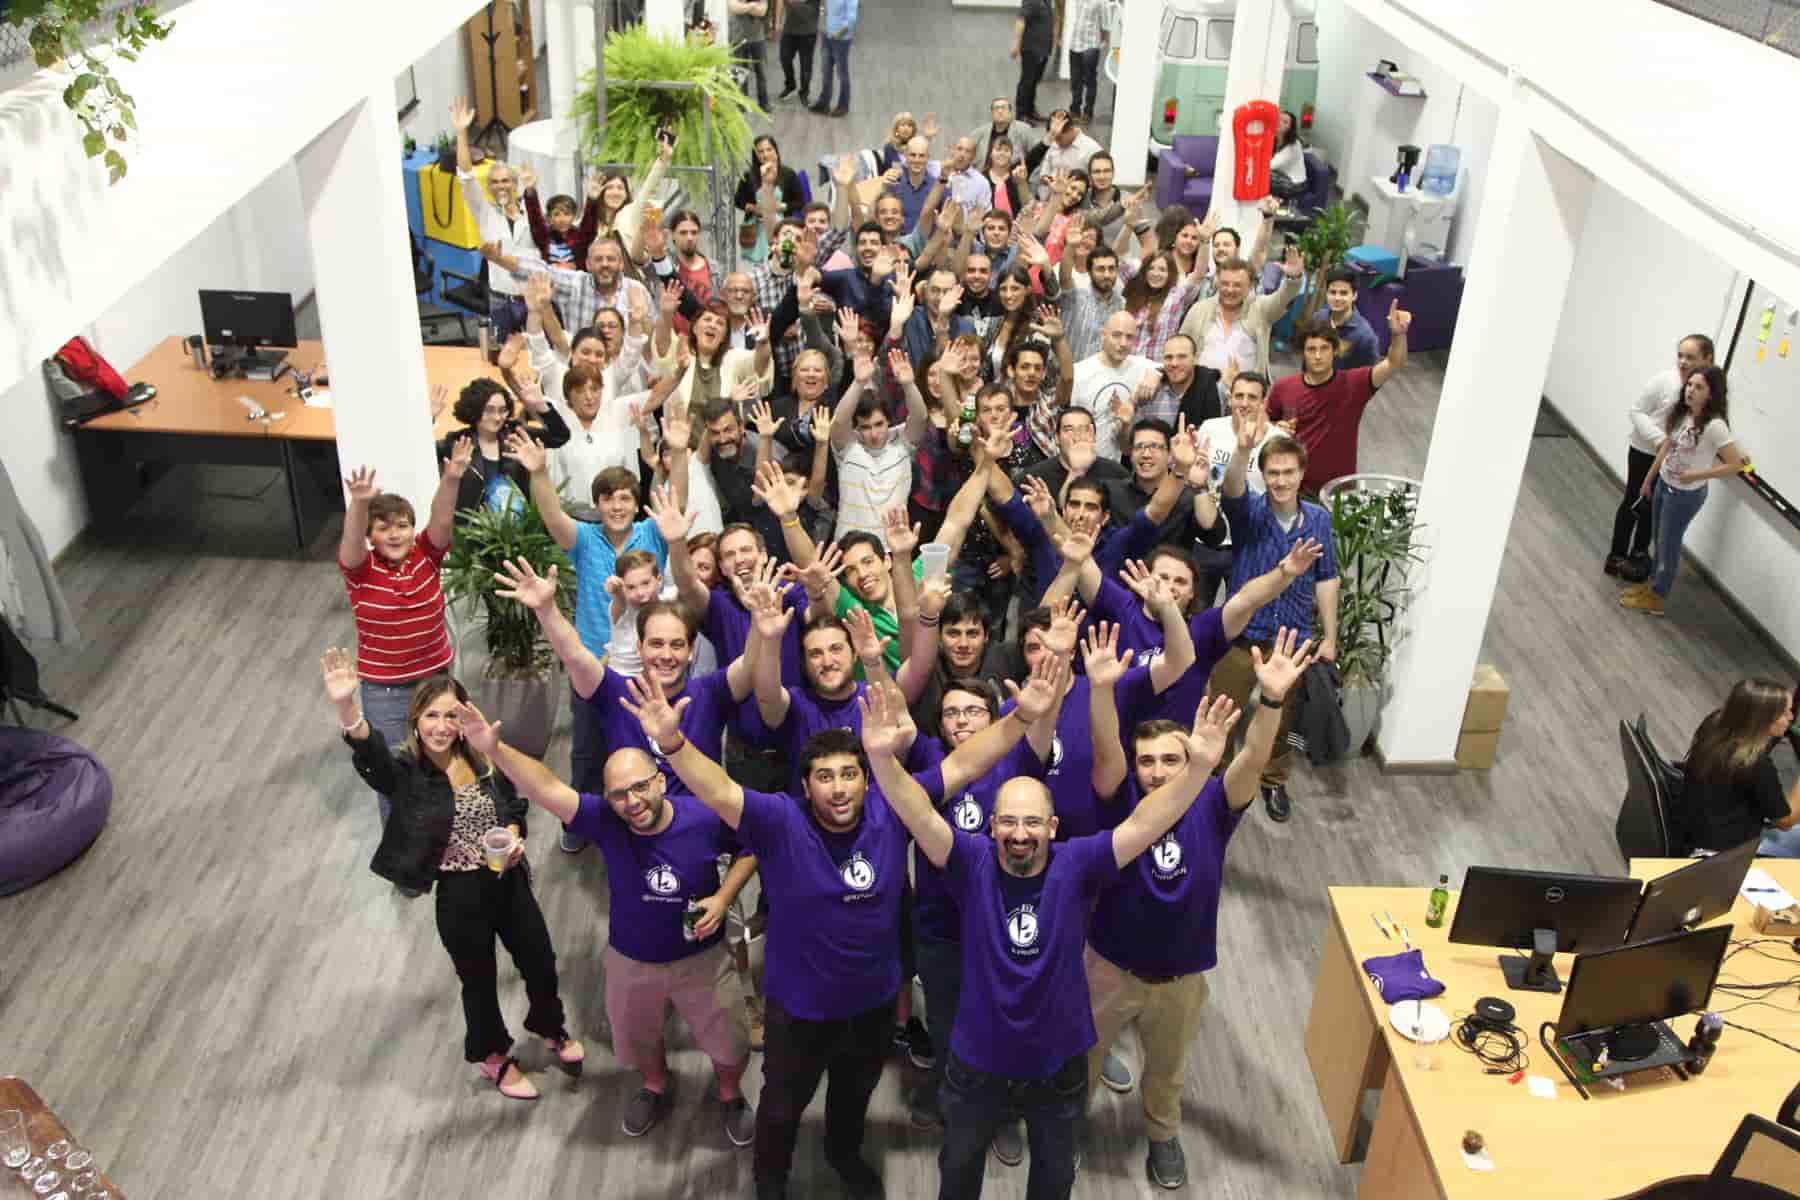 A lively photo capturing the Kaizen Softworks team members in celebration, marking the opening of their first office. The image features a group of individuals gathered together, expressing joy and camaraderie, symbolizing the exciting milestone in the company's history.